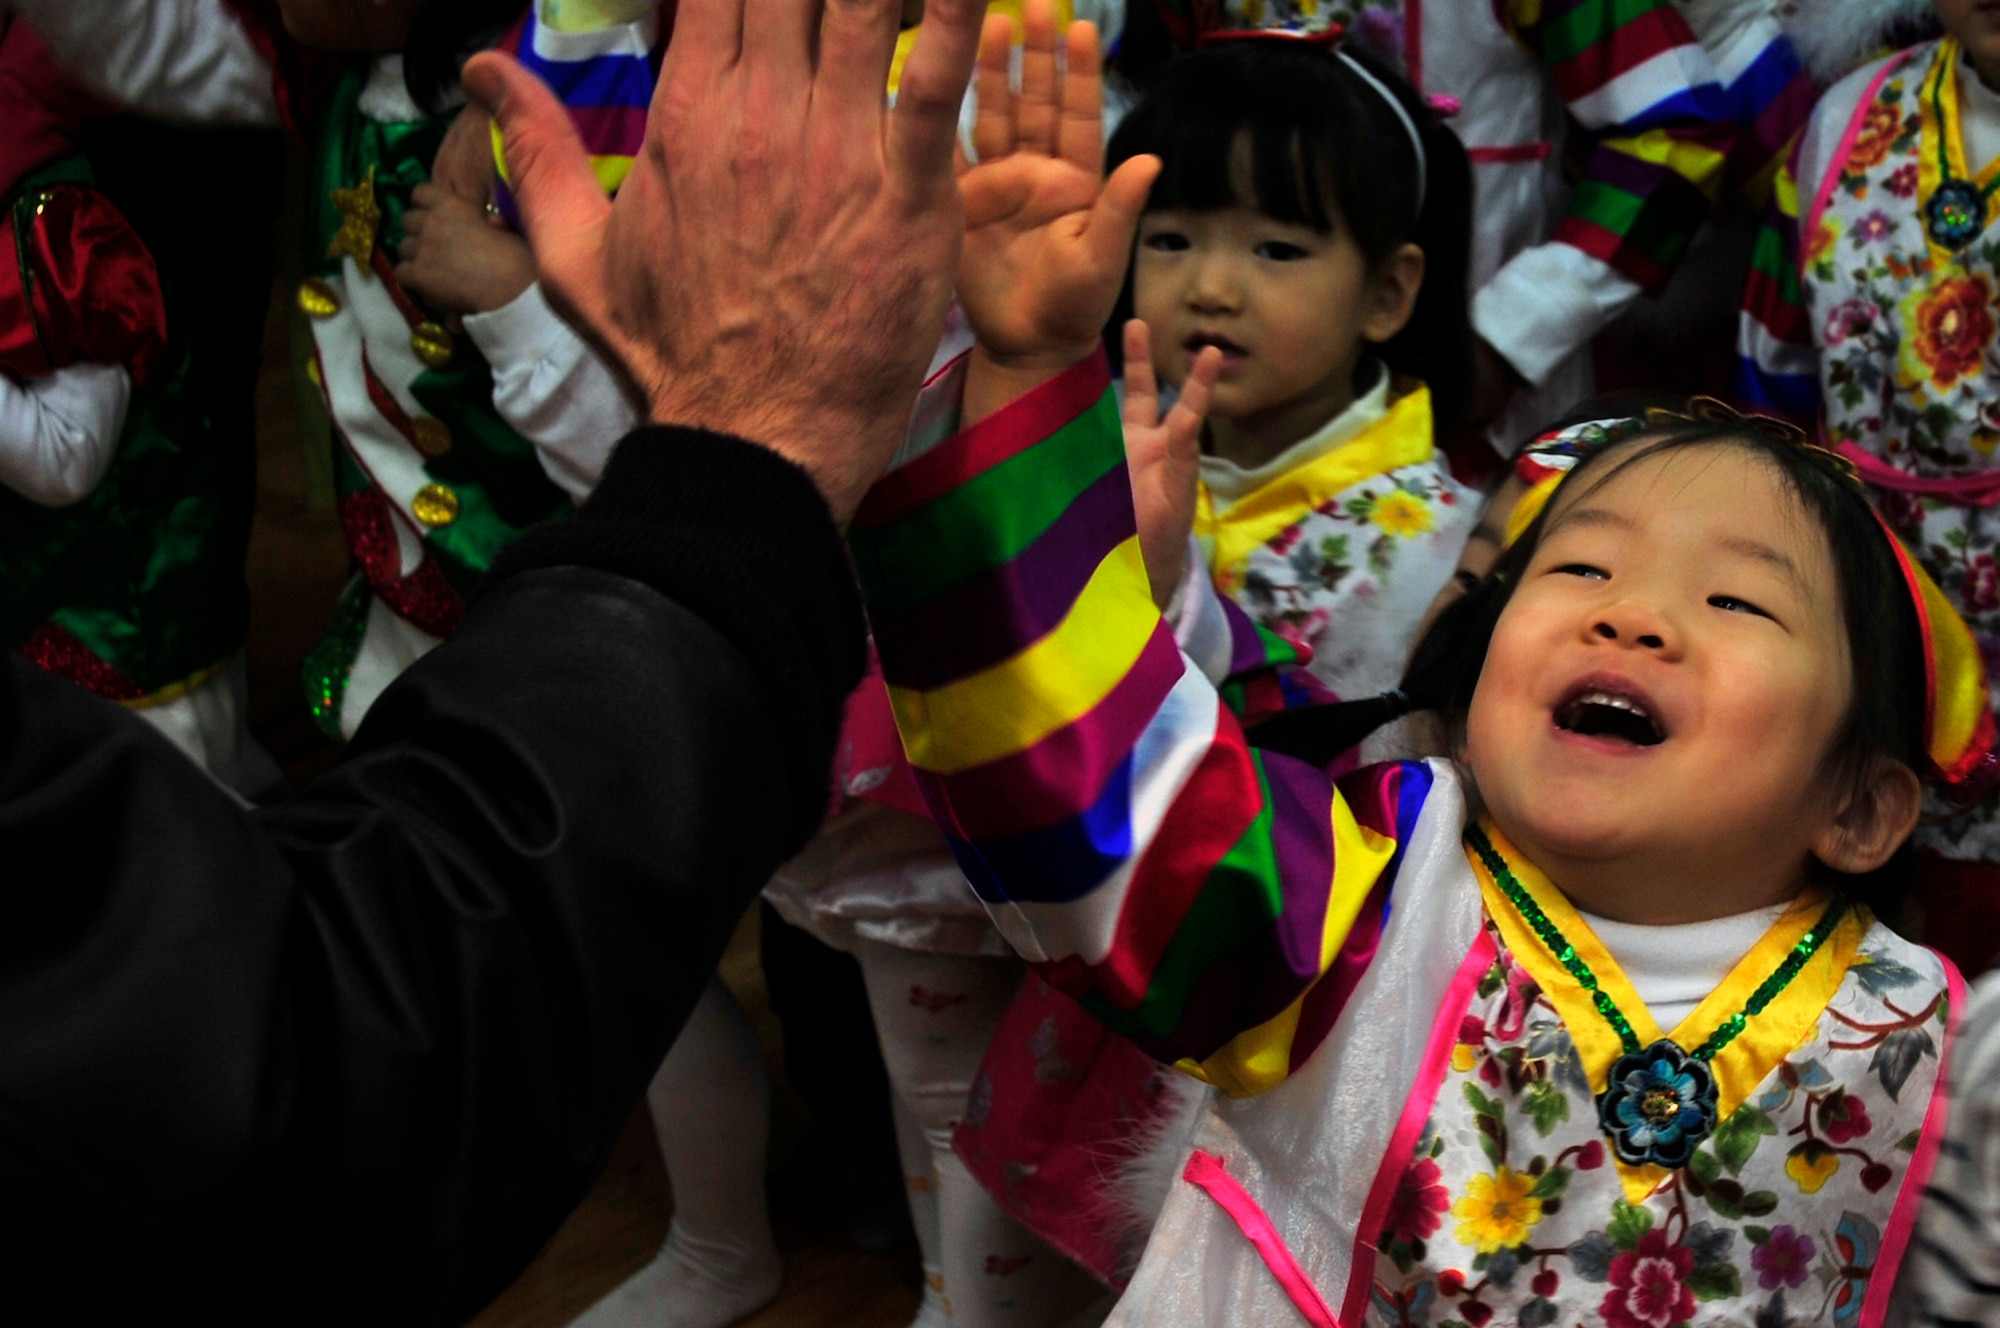 Korean orphans high-five Team Osan volunteers at an orphanage Dec. 22, 2012. Volunteers met with more than 2,000 orphans to spread some holiday cheer. (U.S. Air Force photo/Airman 1st Class Alexis Siekert)